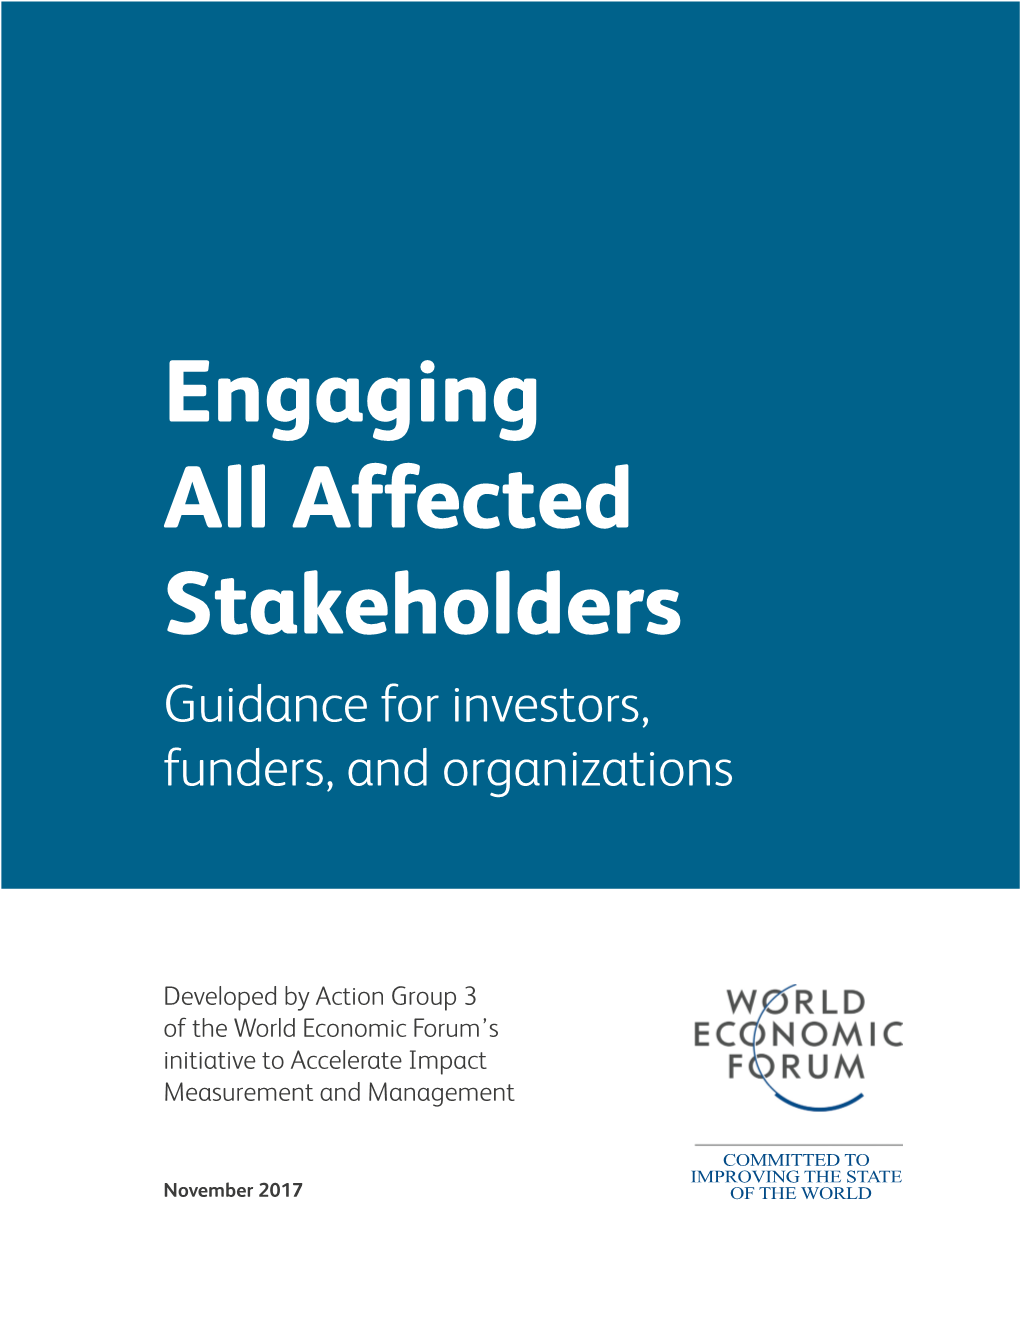 Engaging All Affected Stakeholders: Guidance for Investors, Funders